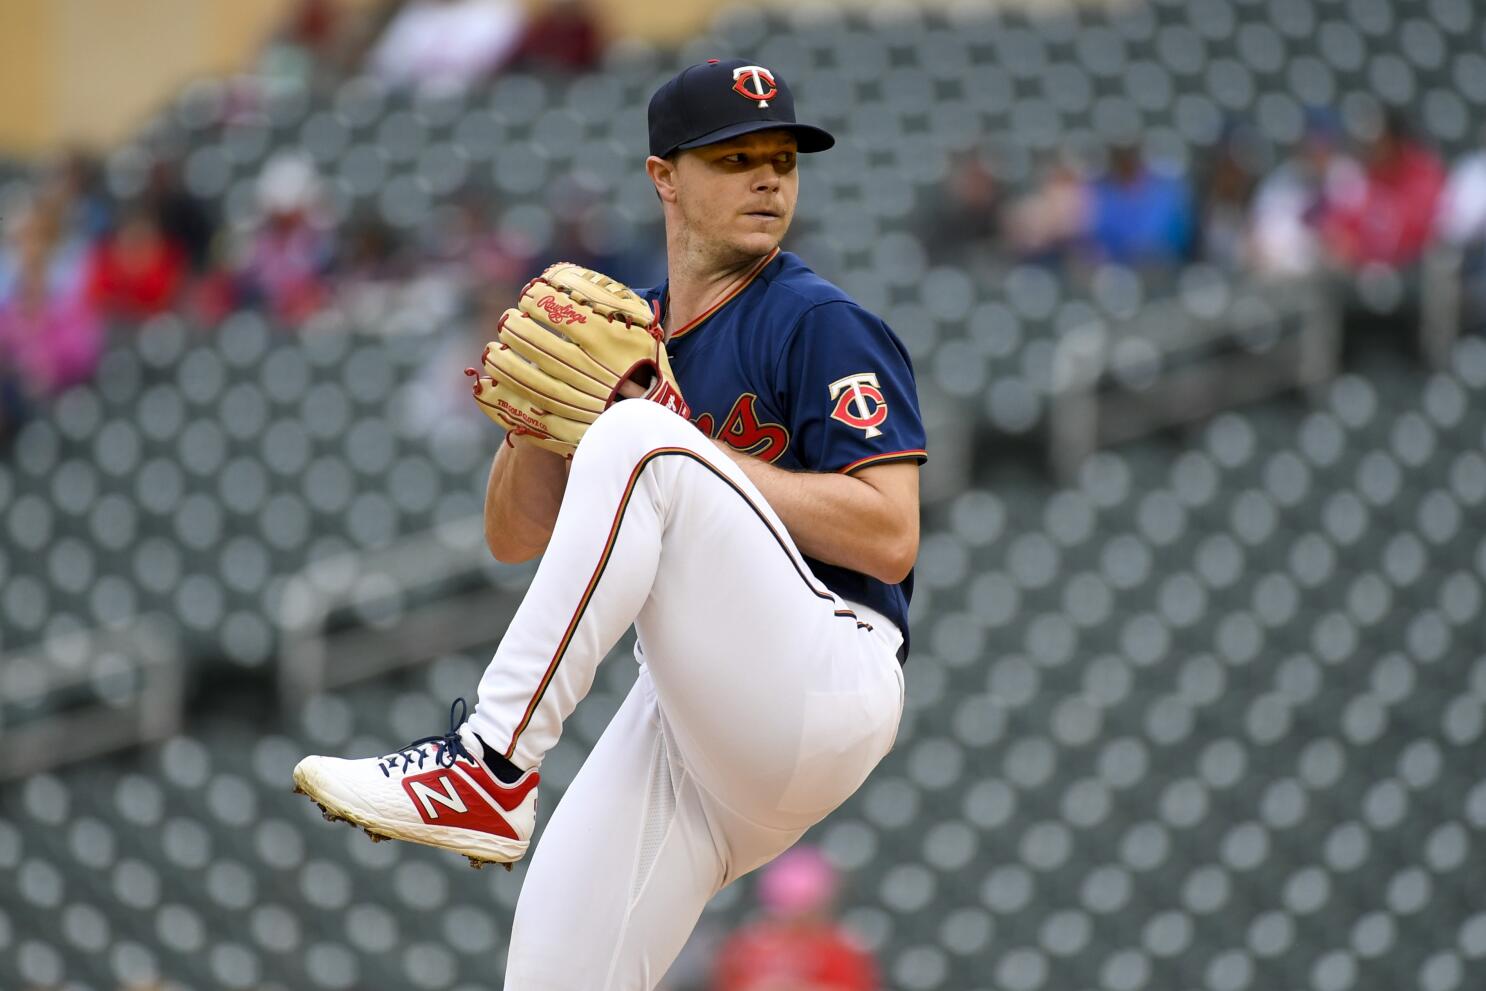 Sonny day: Gray's 7 shutout innings send Twins past Tigers - The San Diego  Union-Tribune